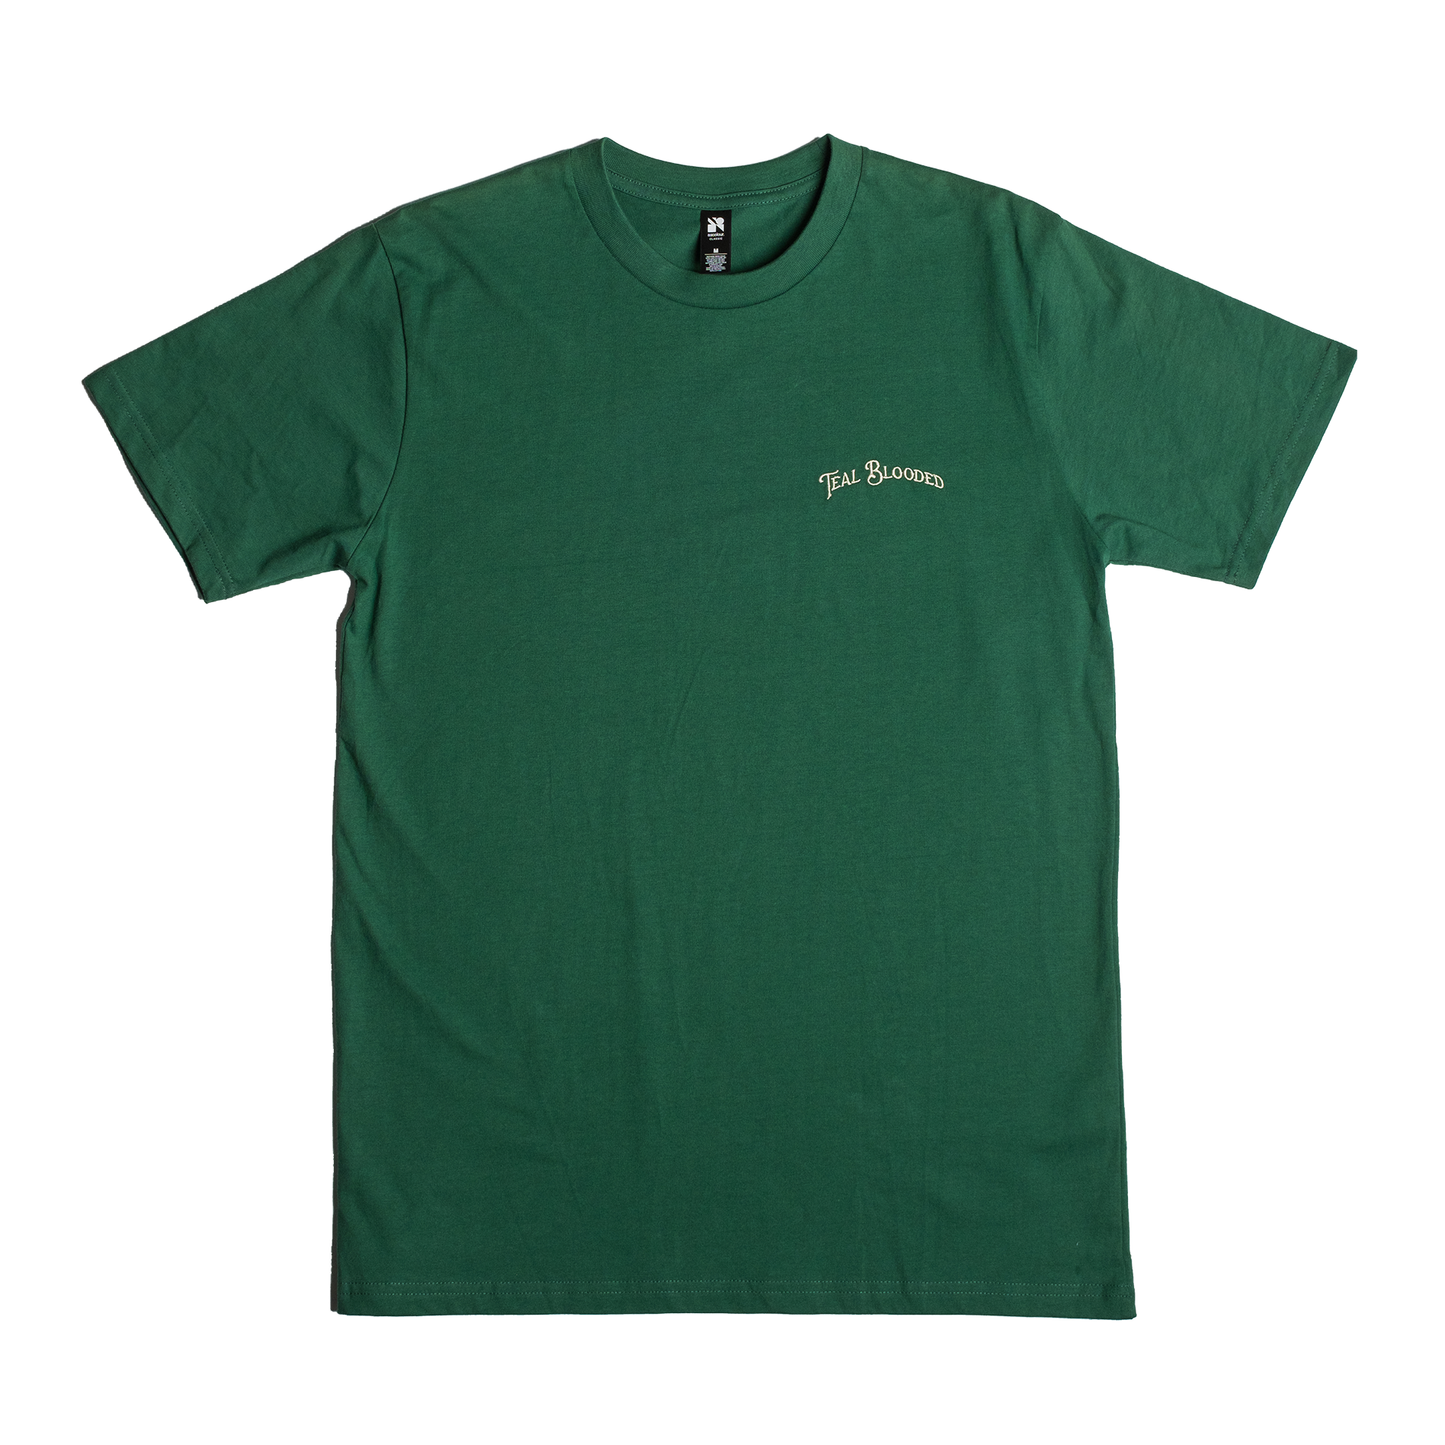 1 of 1 Embroidered "Teal Blooded" in Jade (Medium)